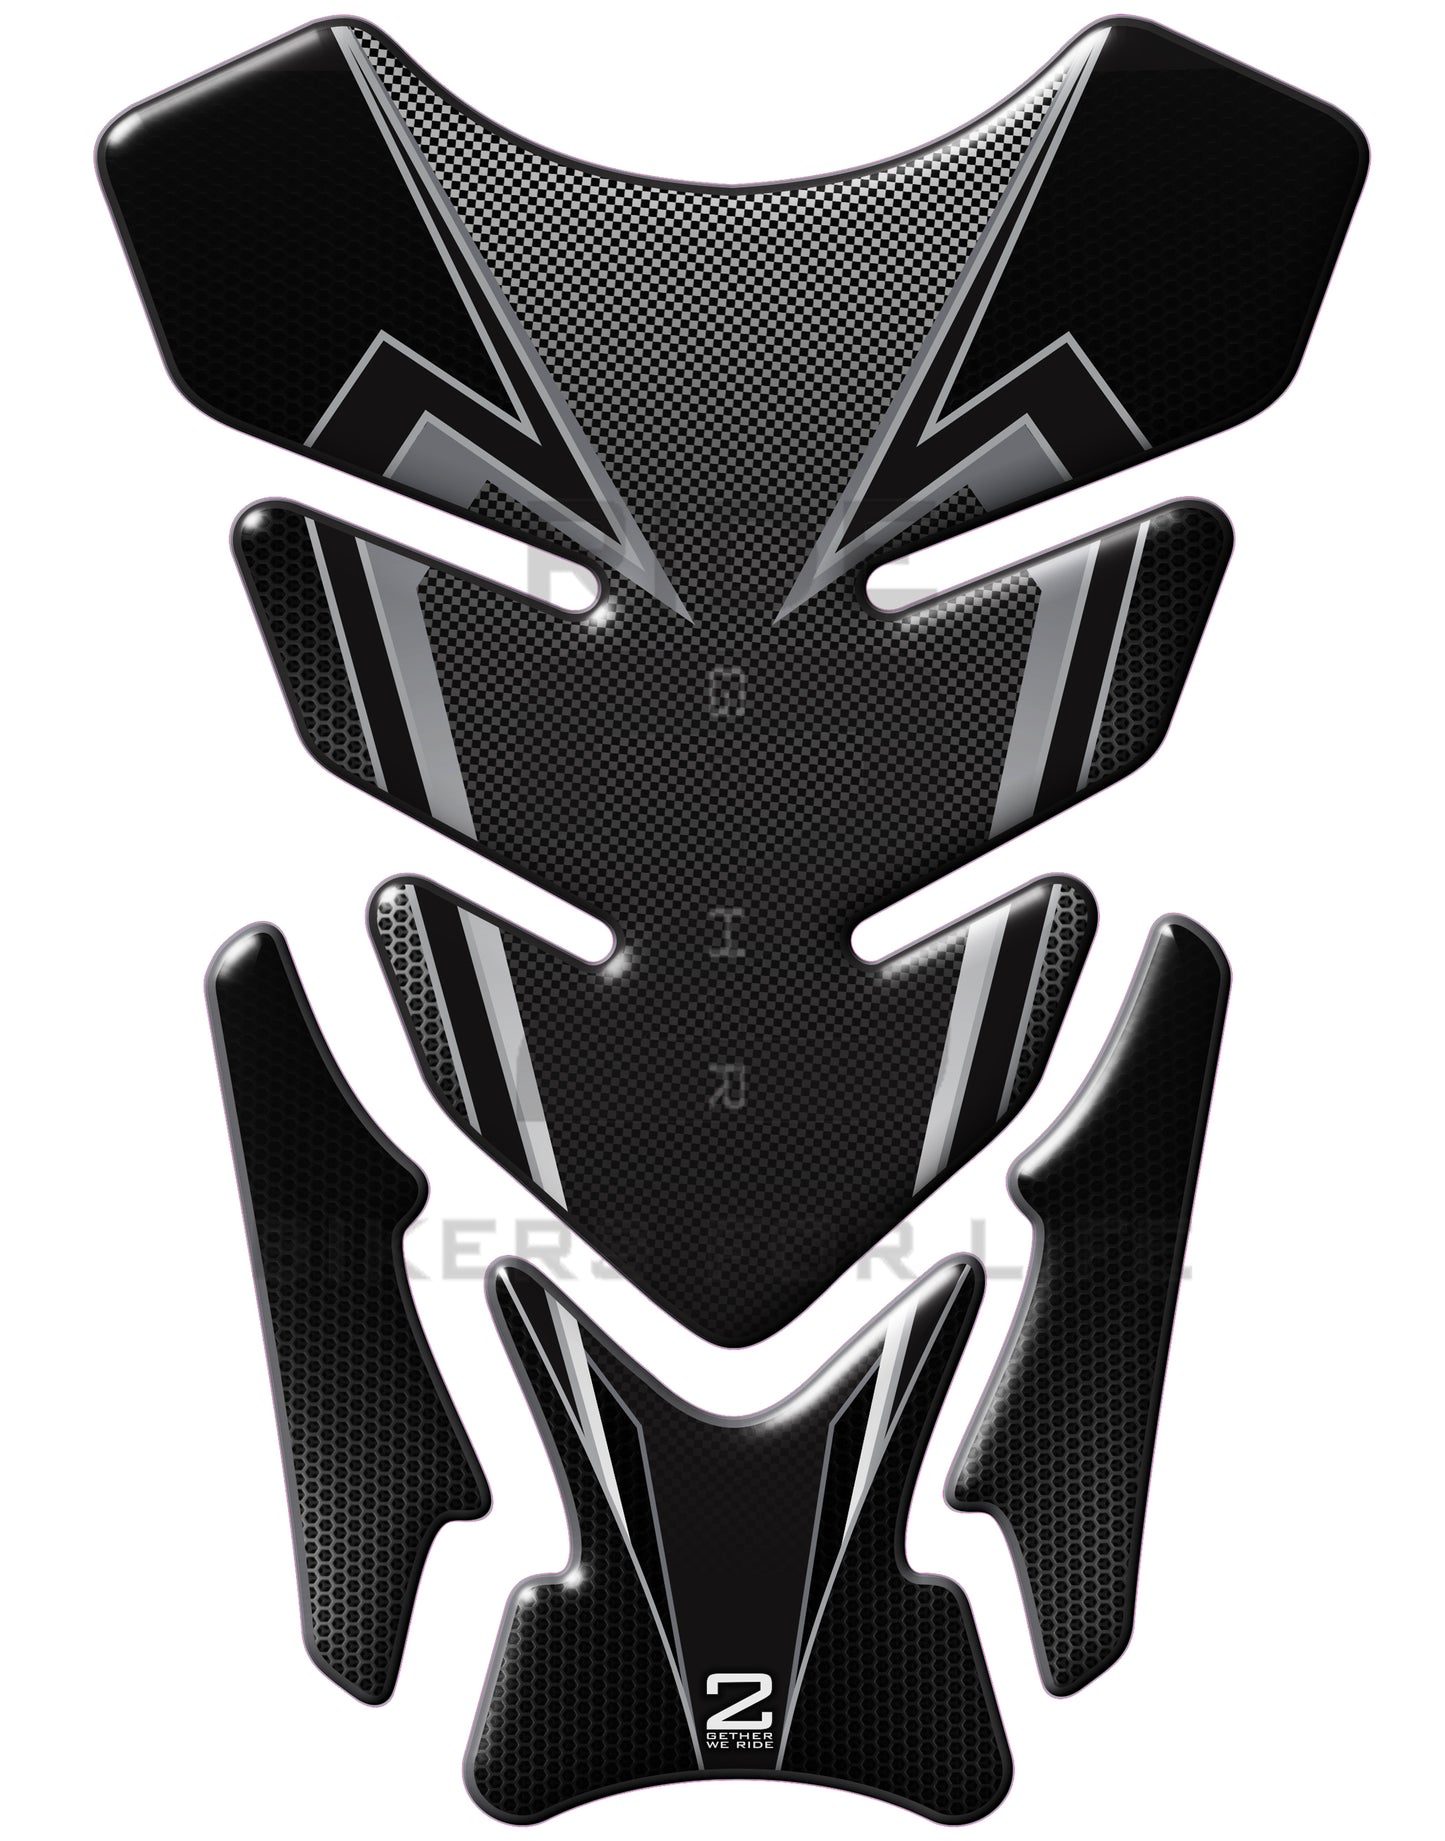 Universal Fit Black Carbon Fibre Motor Bike Tank Pad Protector. A Street Pad which fits most motorcycles.